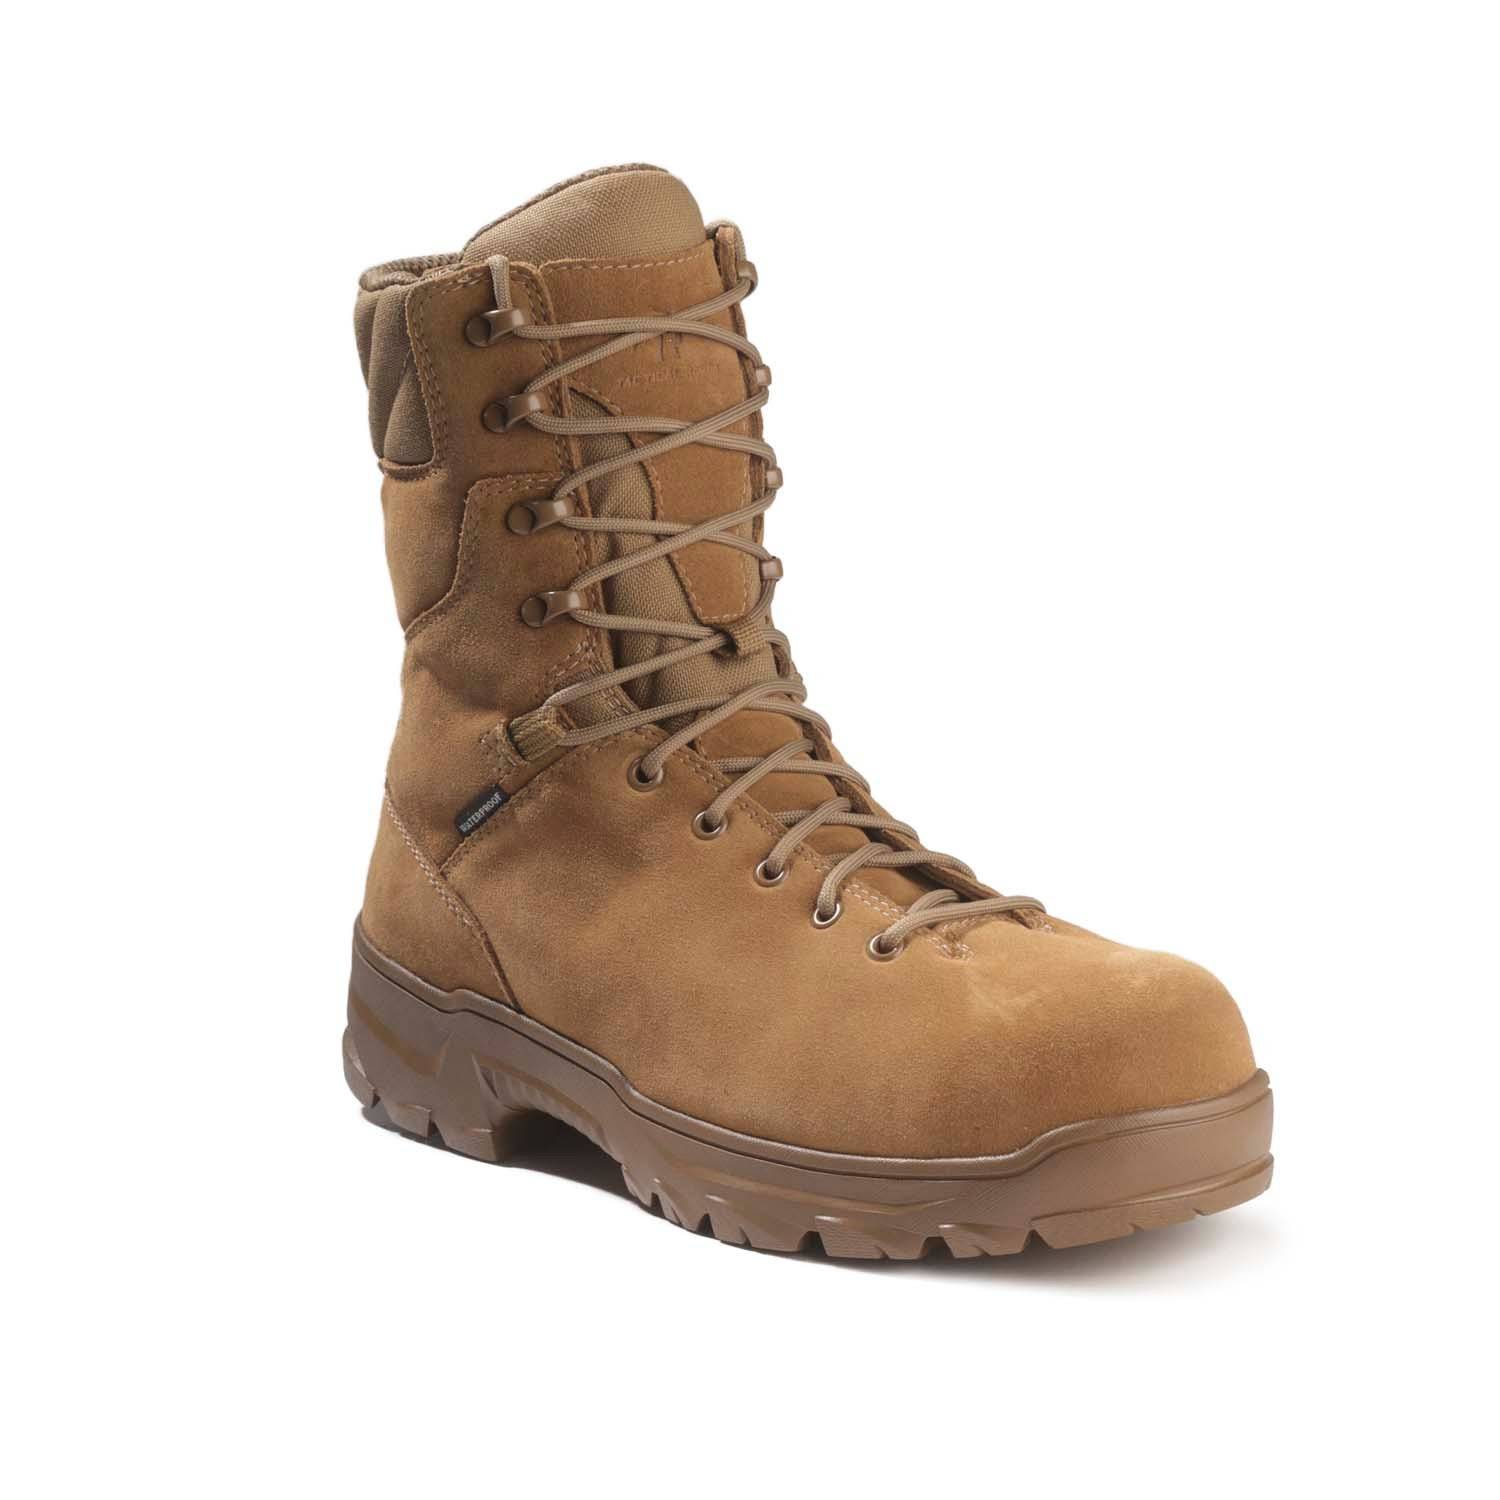 Belleville SQUALL 400g Insulated Composite Toe Boots